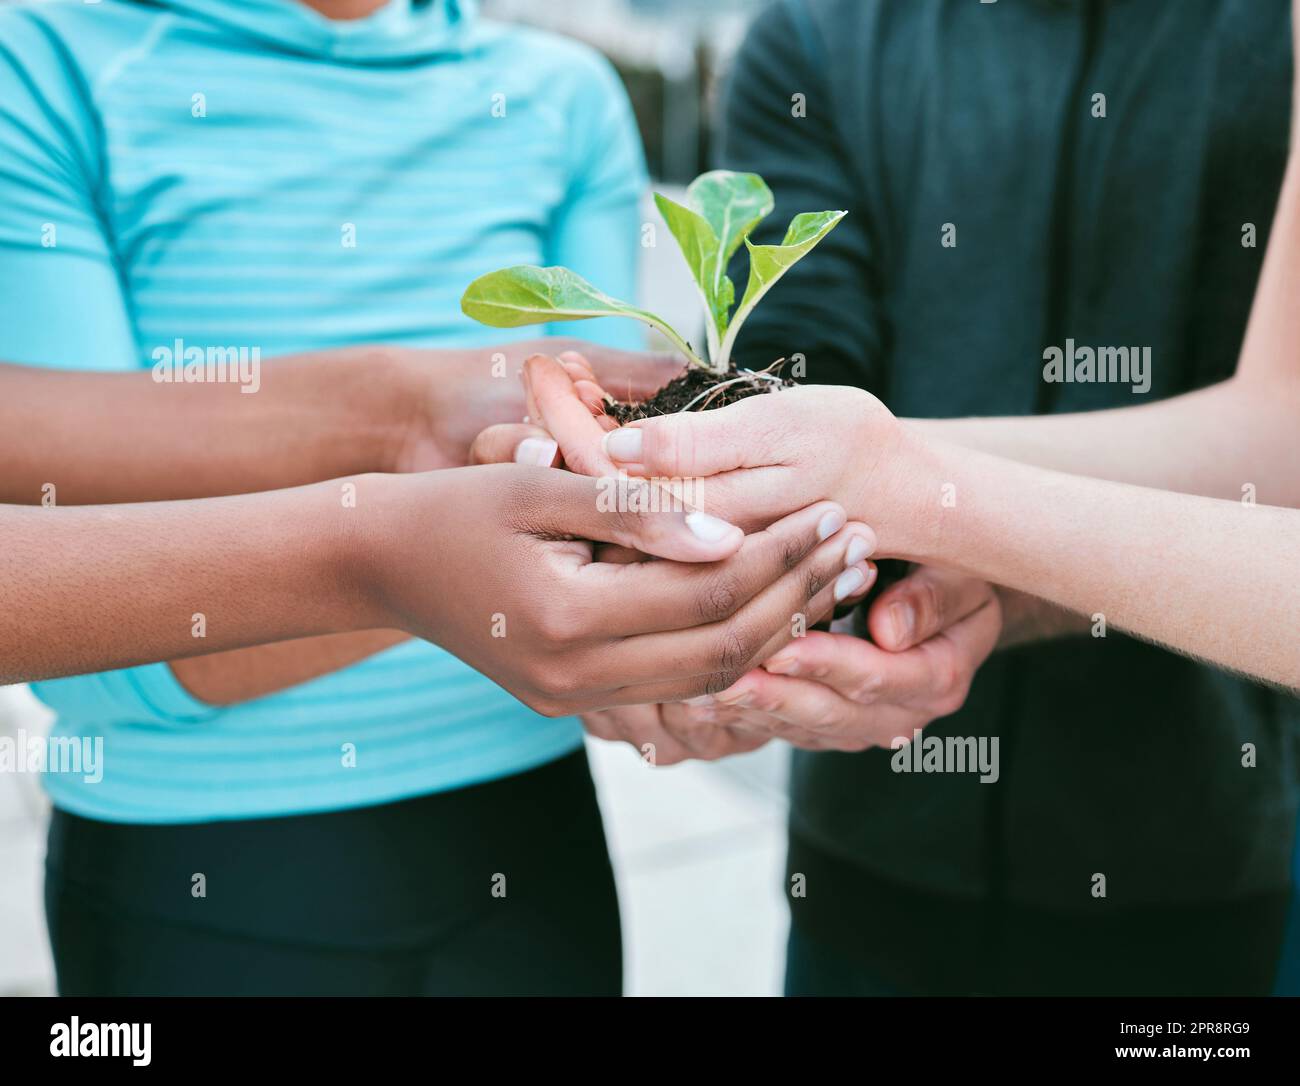 Closeup of diverse group of people holding a green plant in palm of hands with care to nurture and protect nature. Uniting to support seedling with growing leaves as a symbol of being environmentally sustainable and responsible Stock Photo